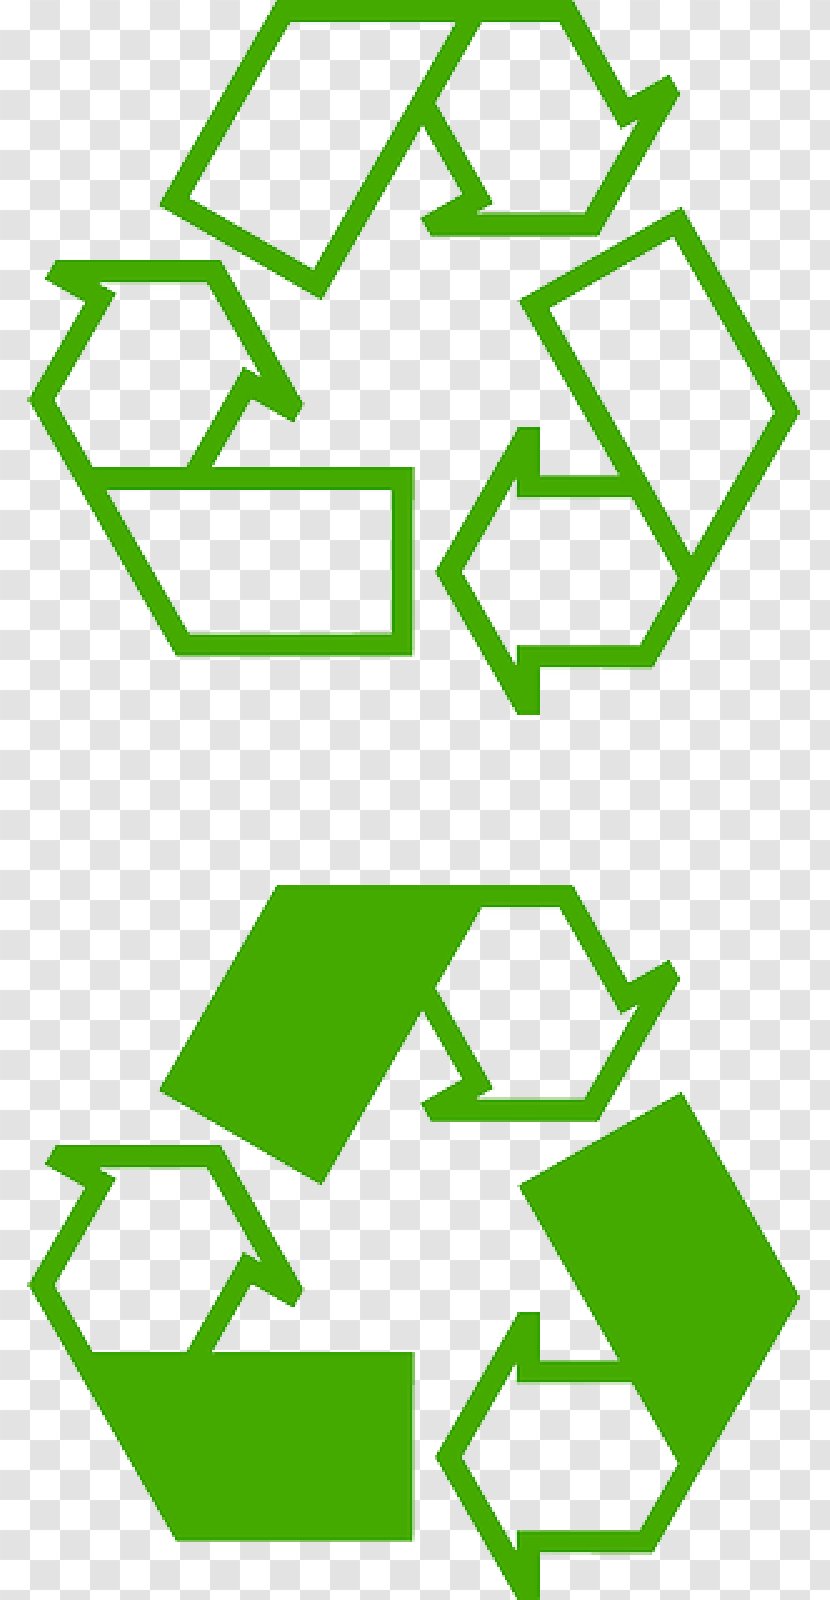 Recycling Symbol Clip Art - Text - Go Green Recycle Graphic Transparent PNG